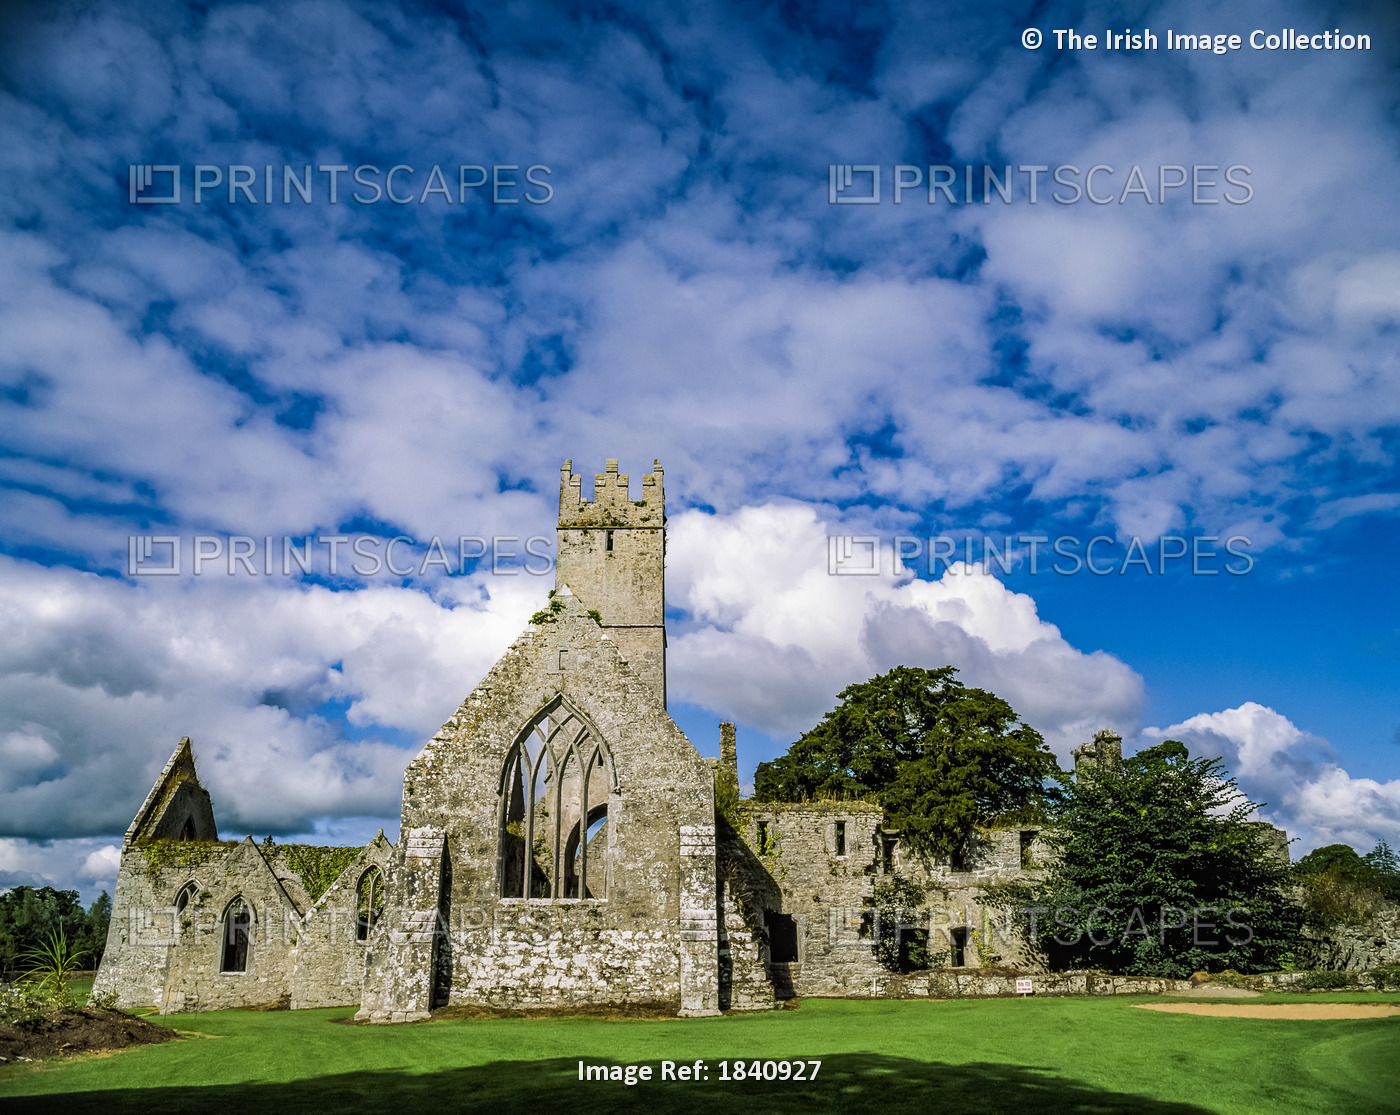 Co Limerick, Franciscan Abbey 15Th Century, Adare